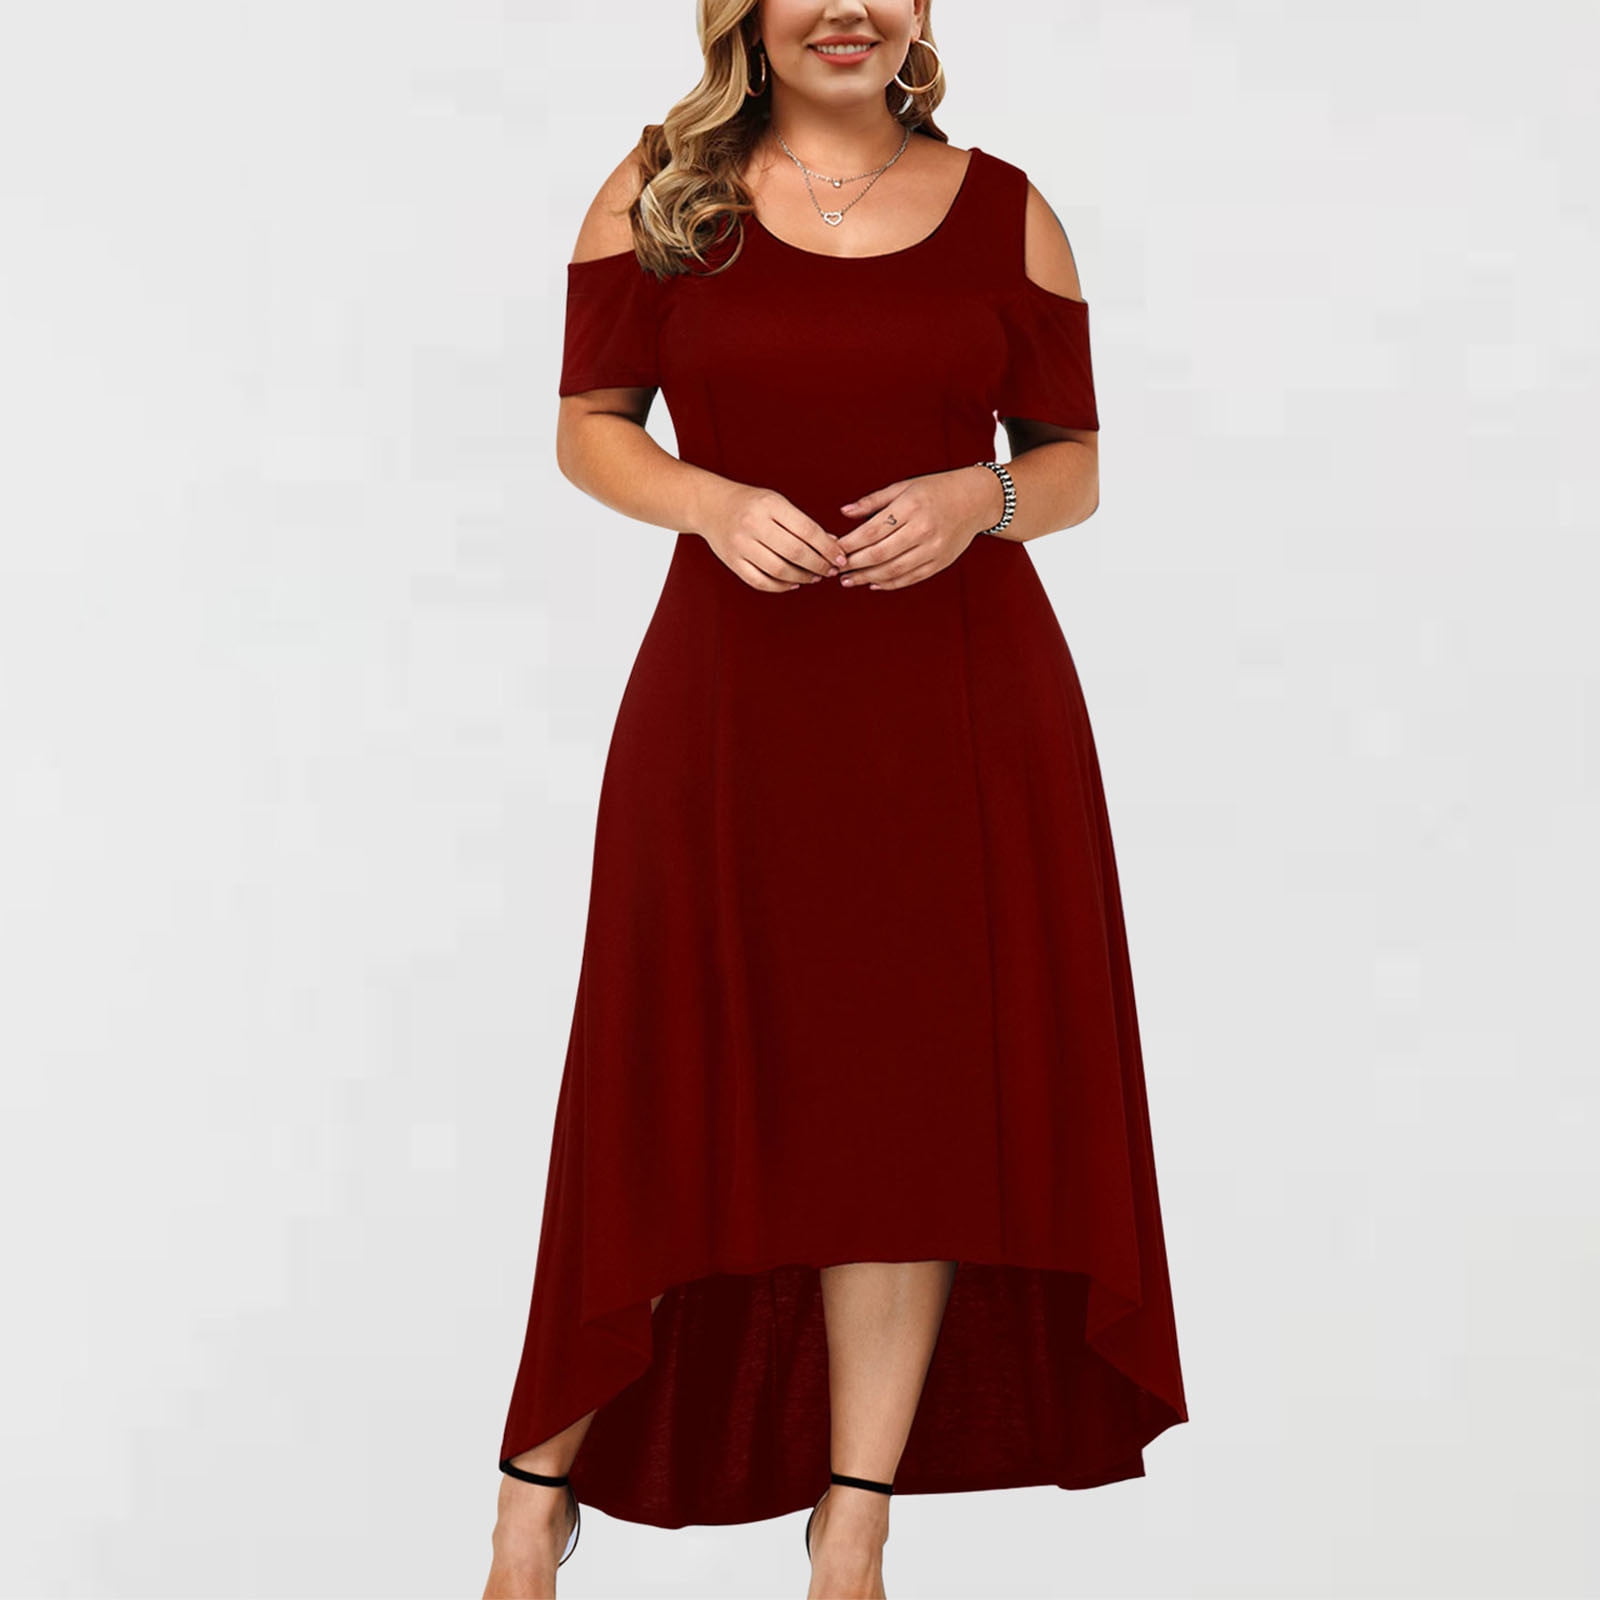 CHGBMOK Clearance Plus Size Wedding Guest Dresses for Women Sexy